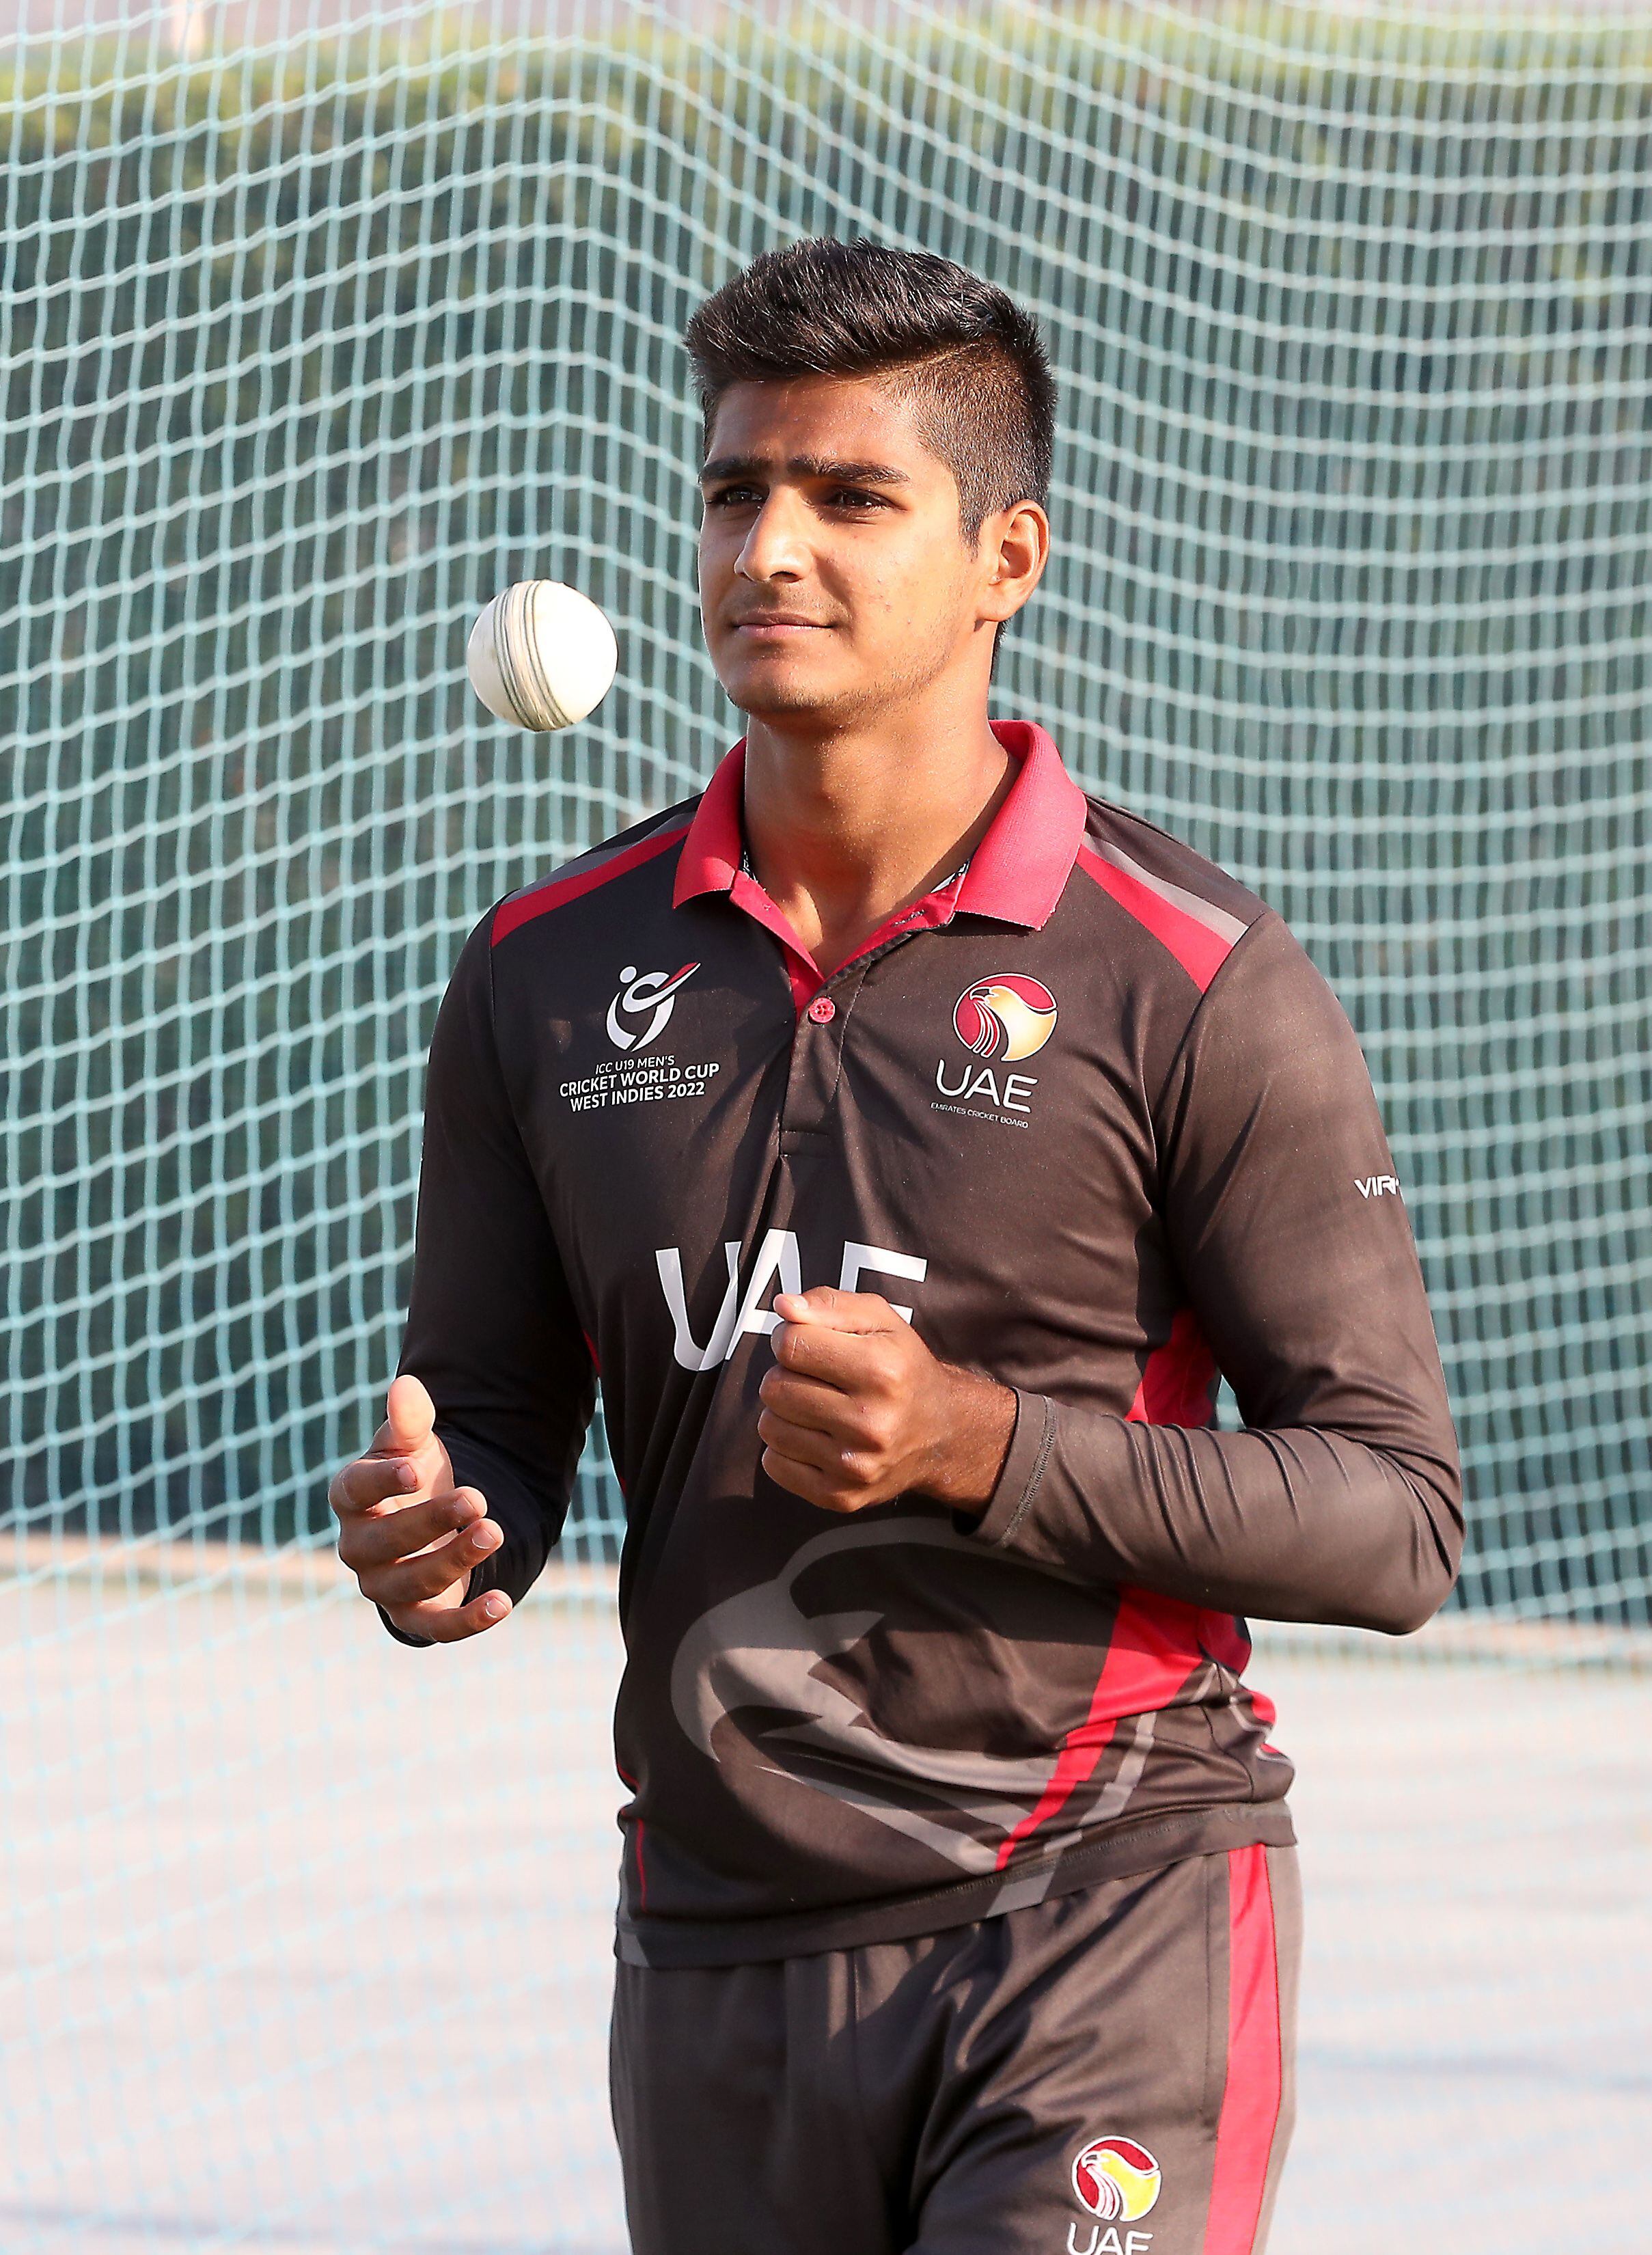 UAE Under 19 World Cup hero Dhruv Parashar: 'We wanted to make everyone  back home proud'